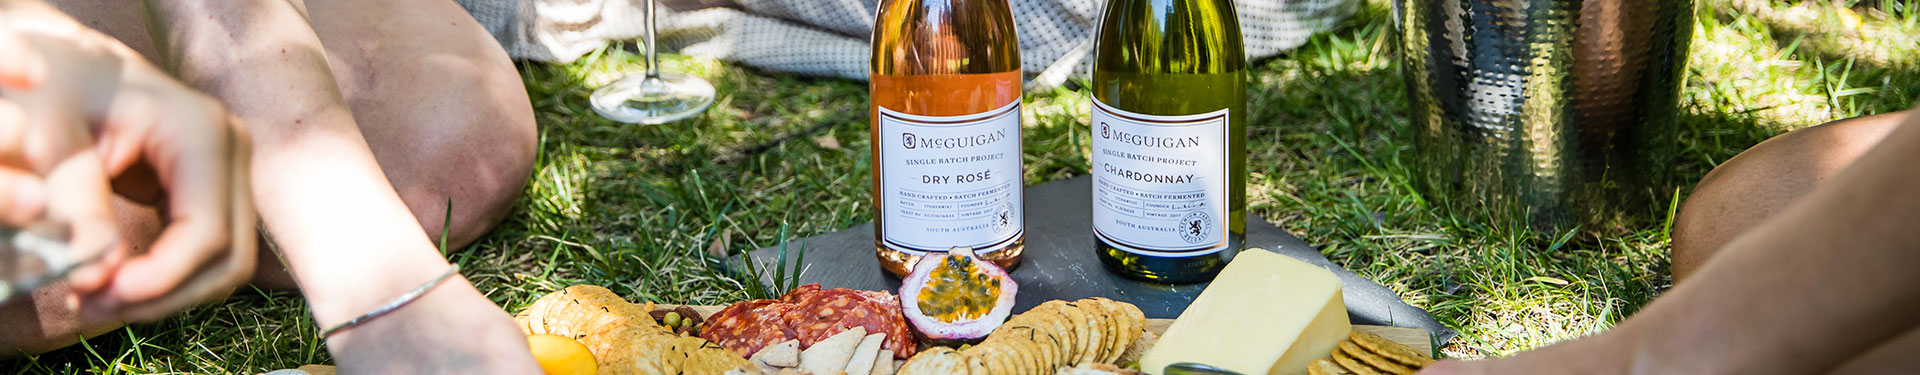 Two glasses and a bottle of McGuigan rose outdoors in a picnic setting